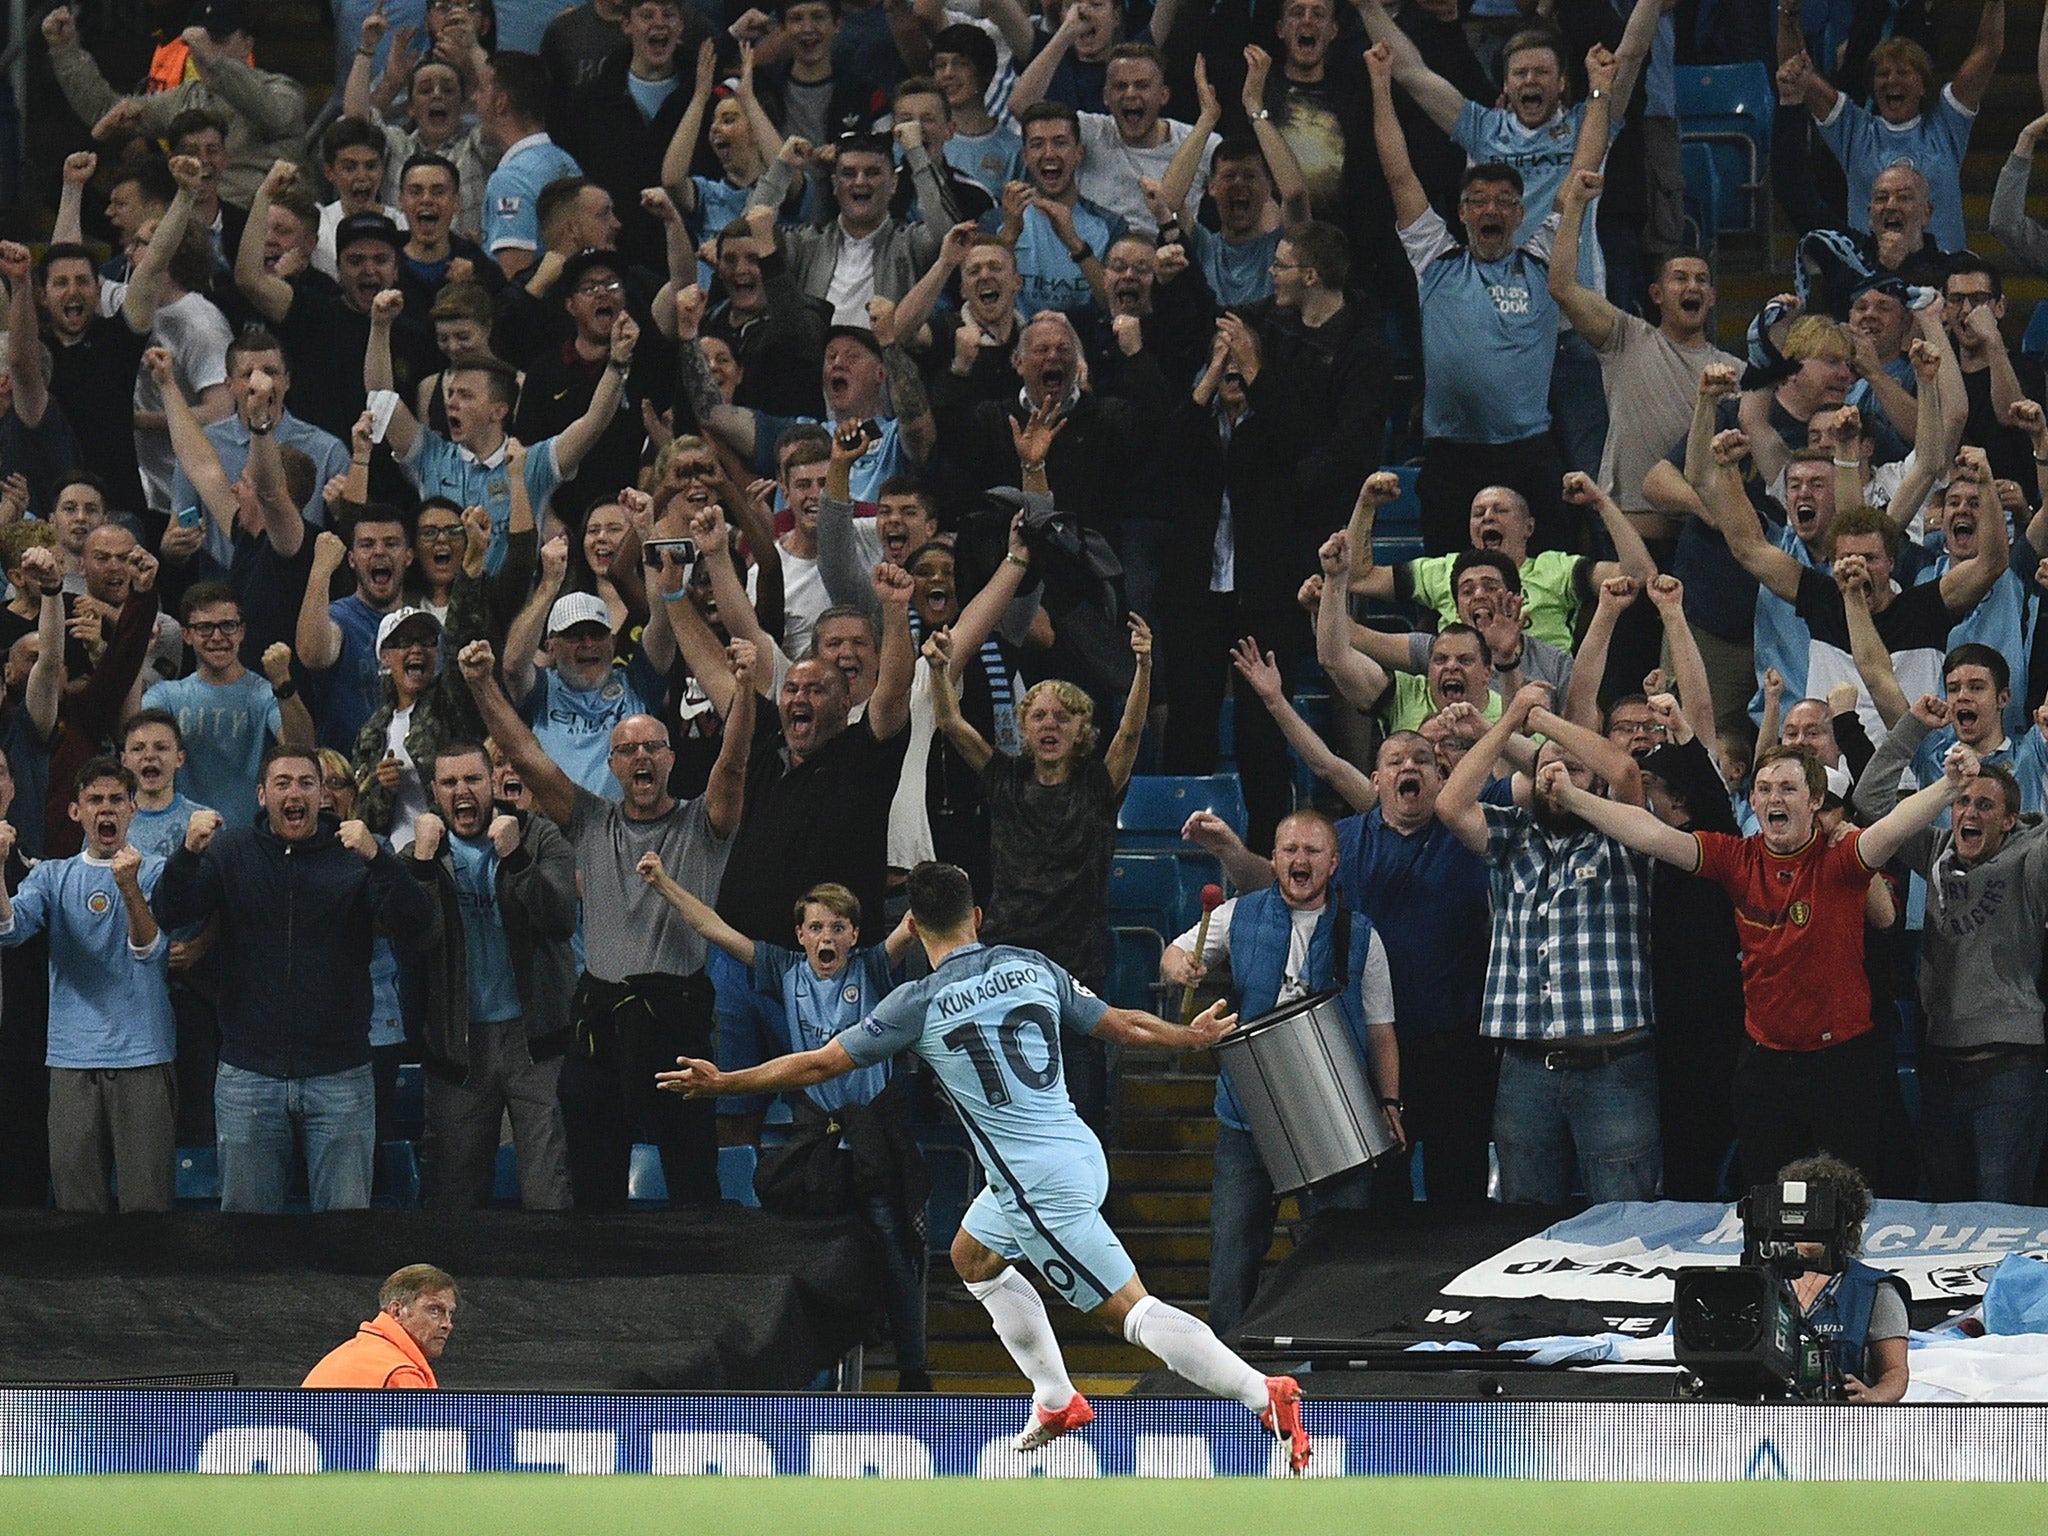 Sergio Aguero celebrates during a Champions league match for Manchester City